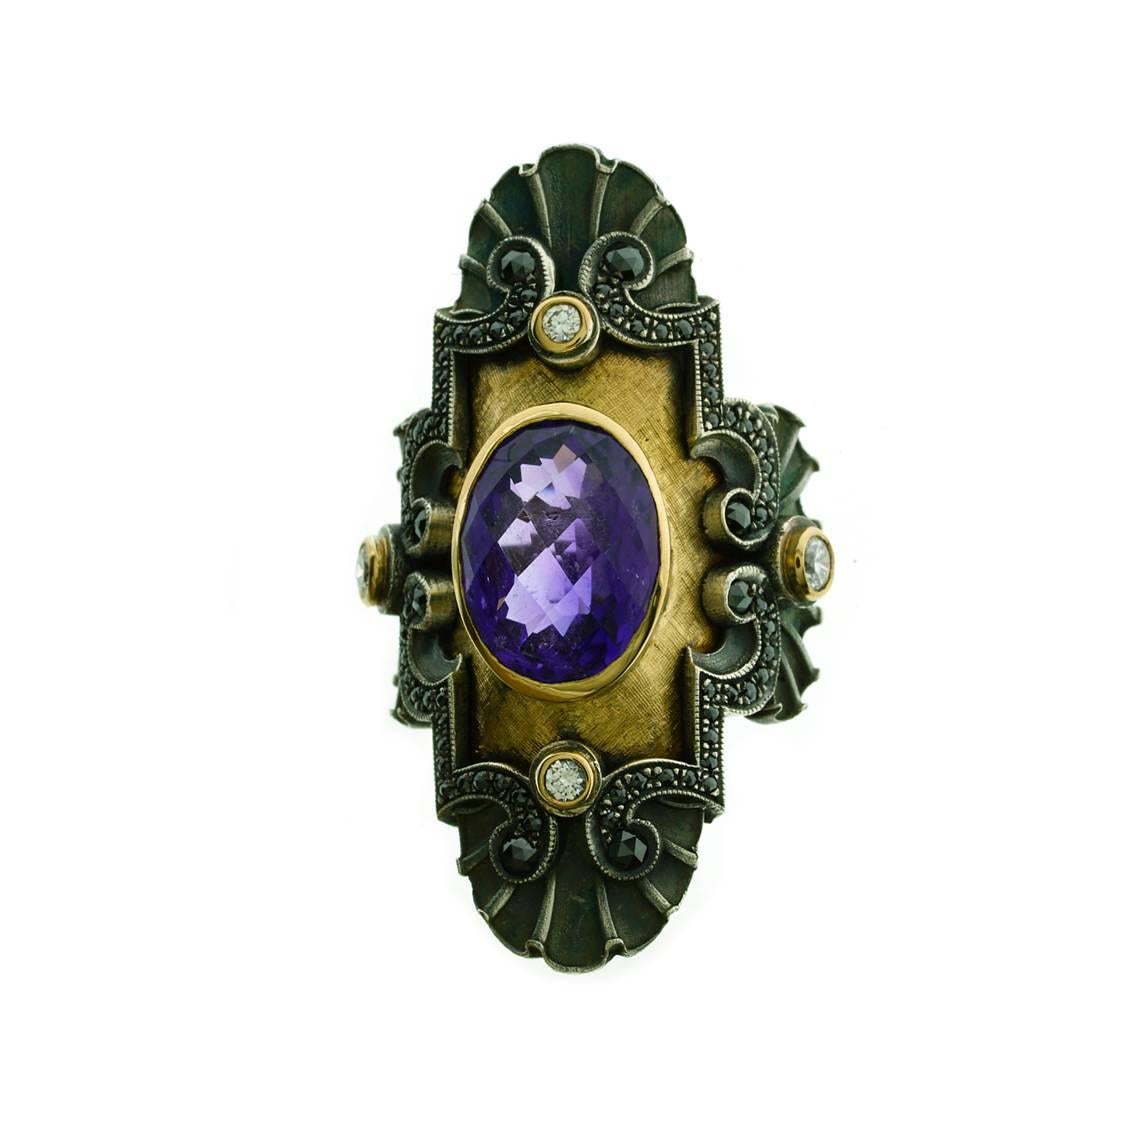 This majestic ring has been designed with a monumental Medieval profile with stunning Art Deco Style flourishes.

Handmade in 18kt yellow gold and oxidized sterling silver. This glorious ring features a central oval, checkerboard cut amethyst,